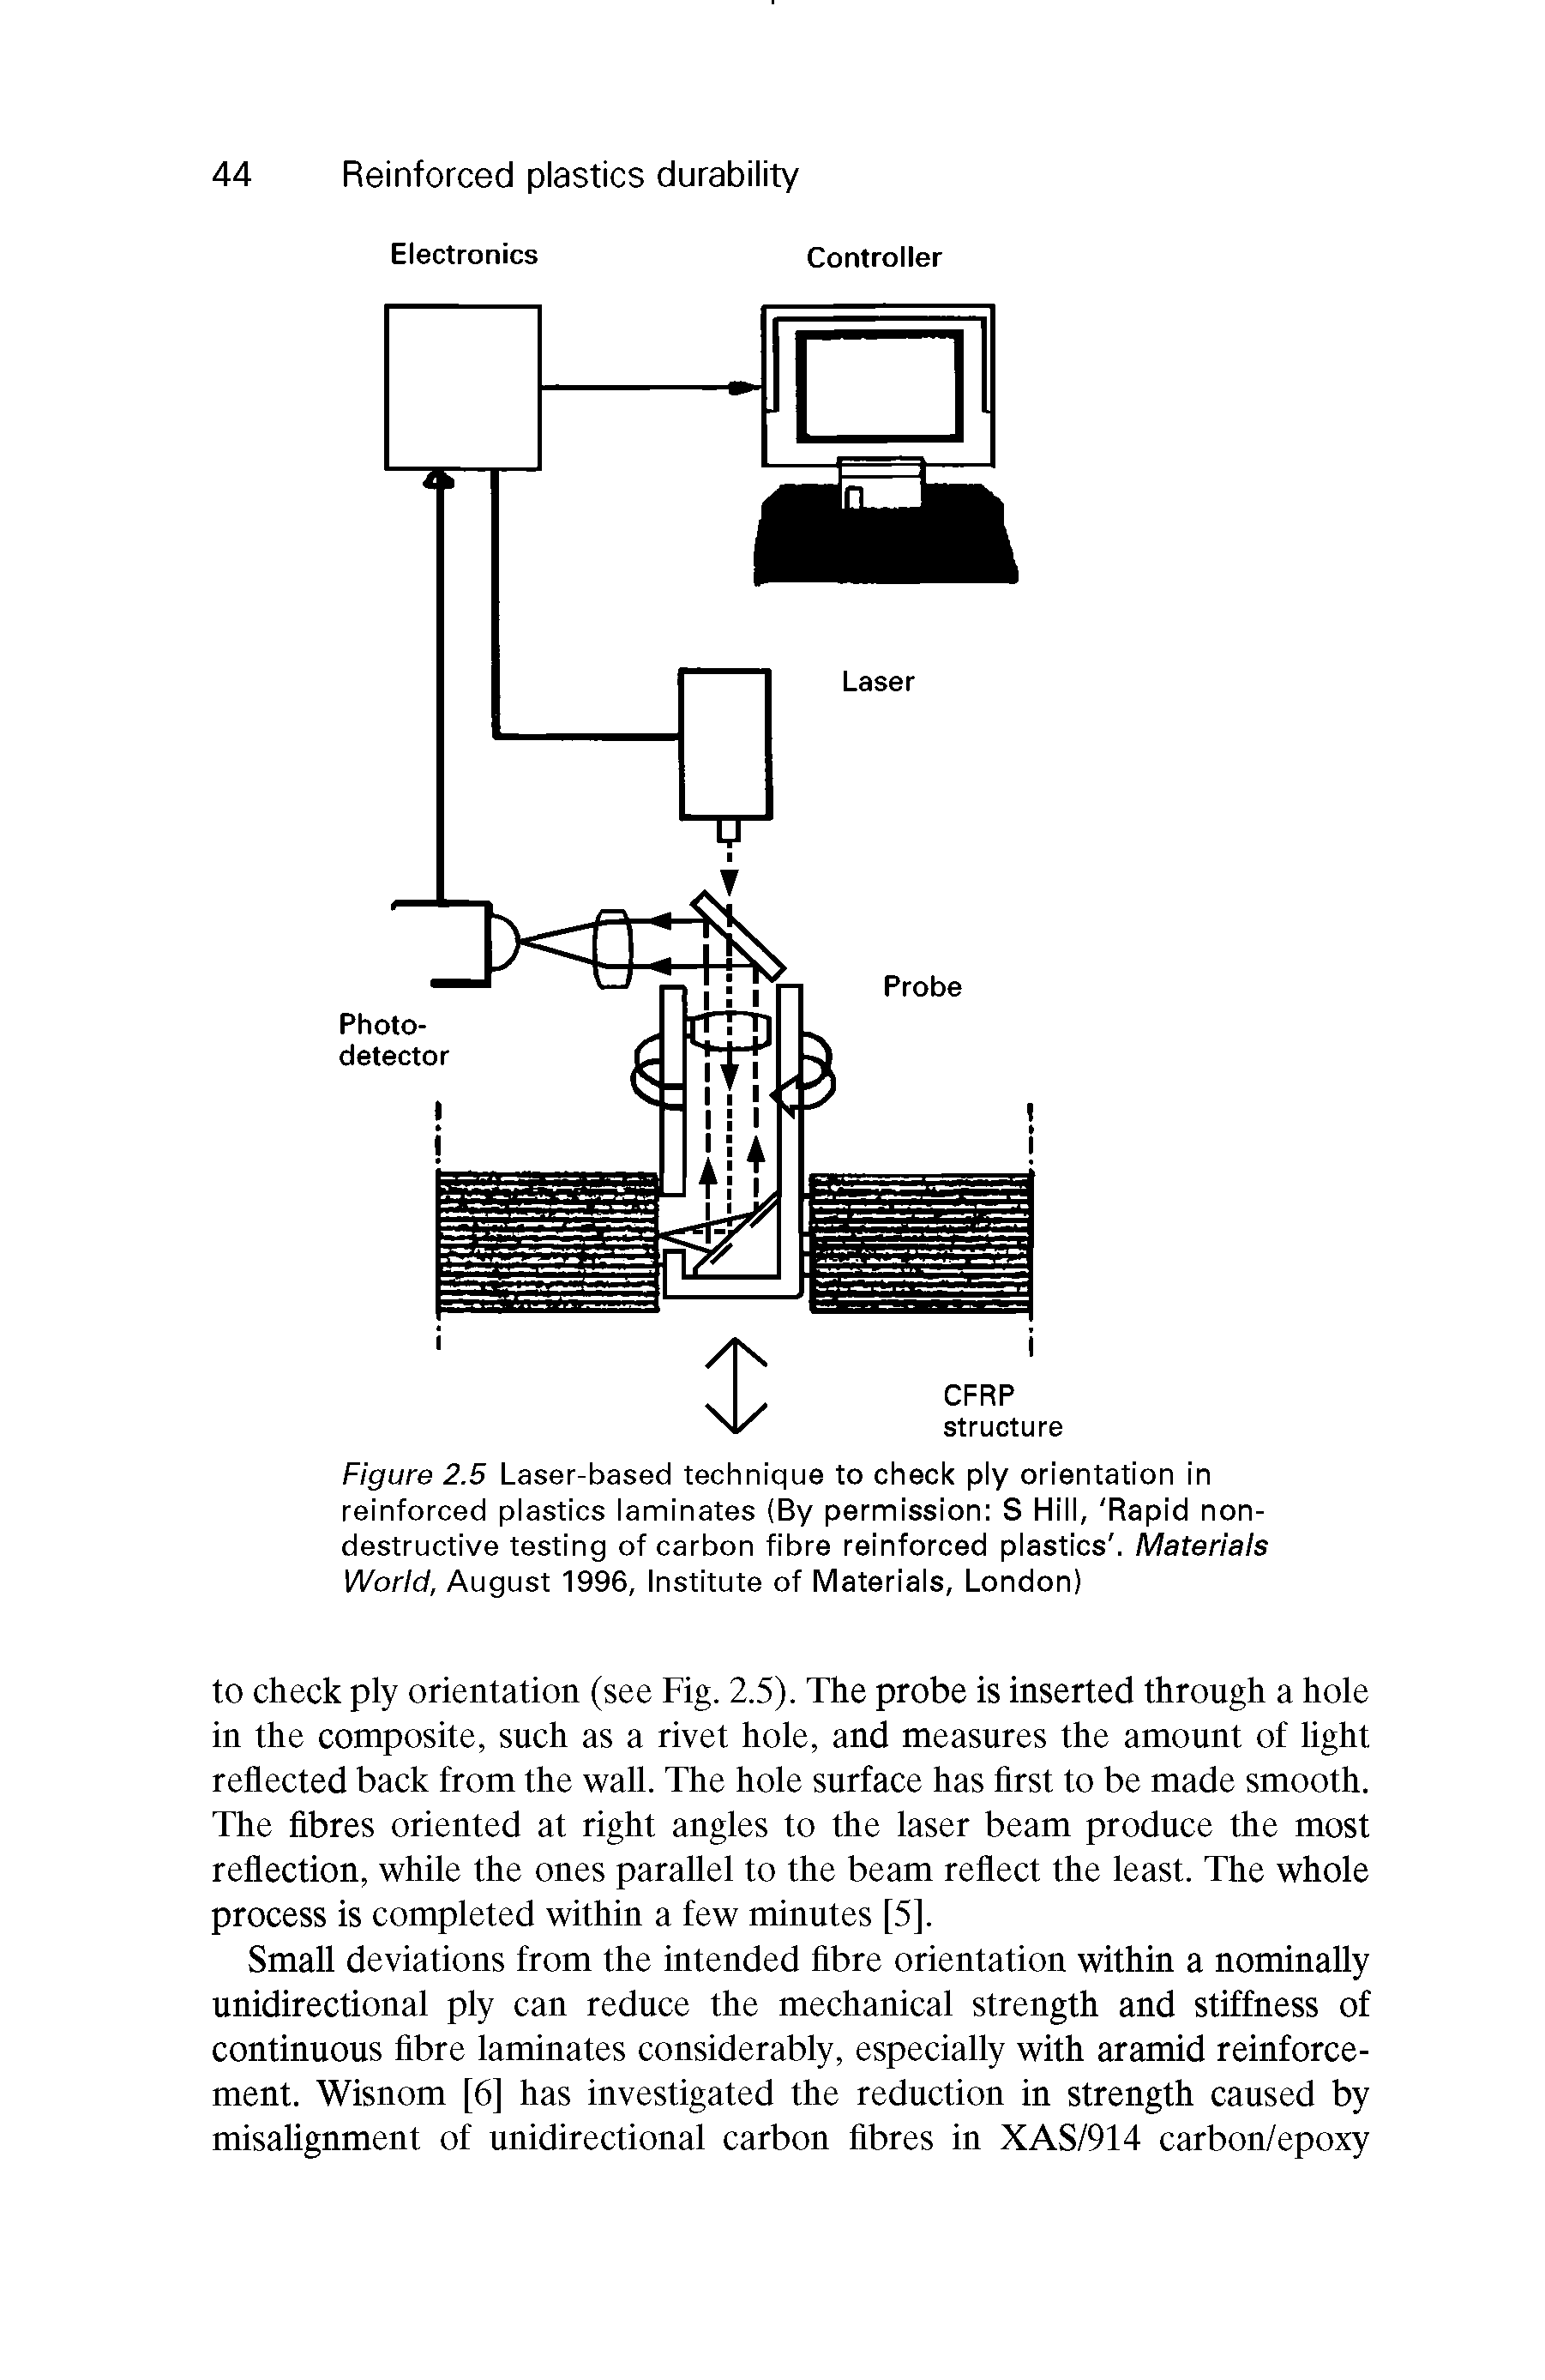 Figure 2.5 Laser-based technique to check ply orientation in reinforced plastics laminates (By permission S Hill, Rapid nondestructive testing of carbon fibre reinforced plastics. Materials World, August 1996, Institute of Materials, London)...